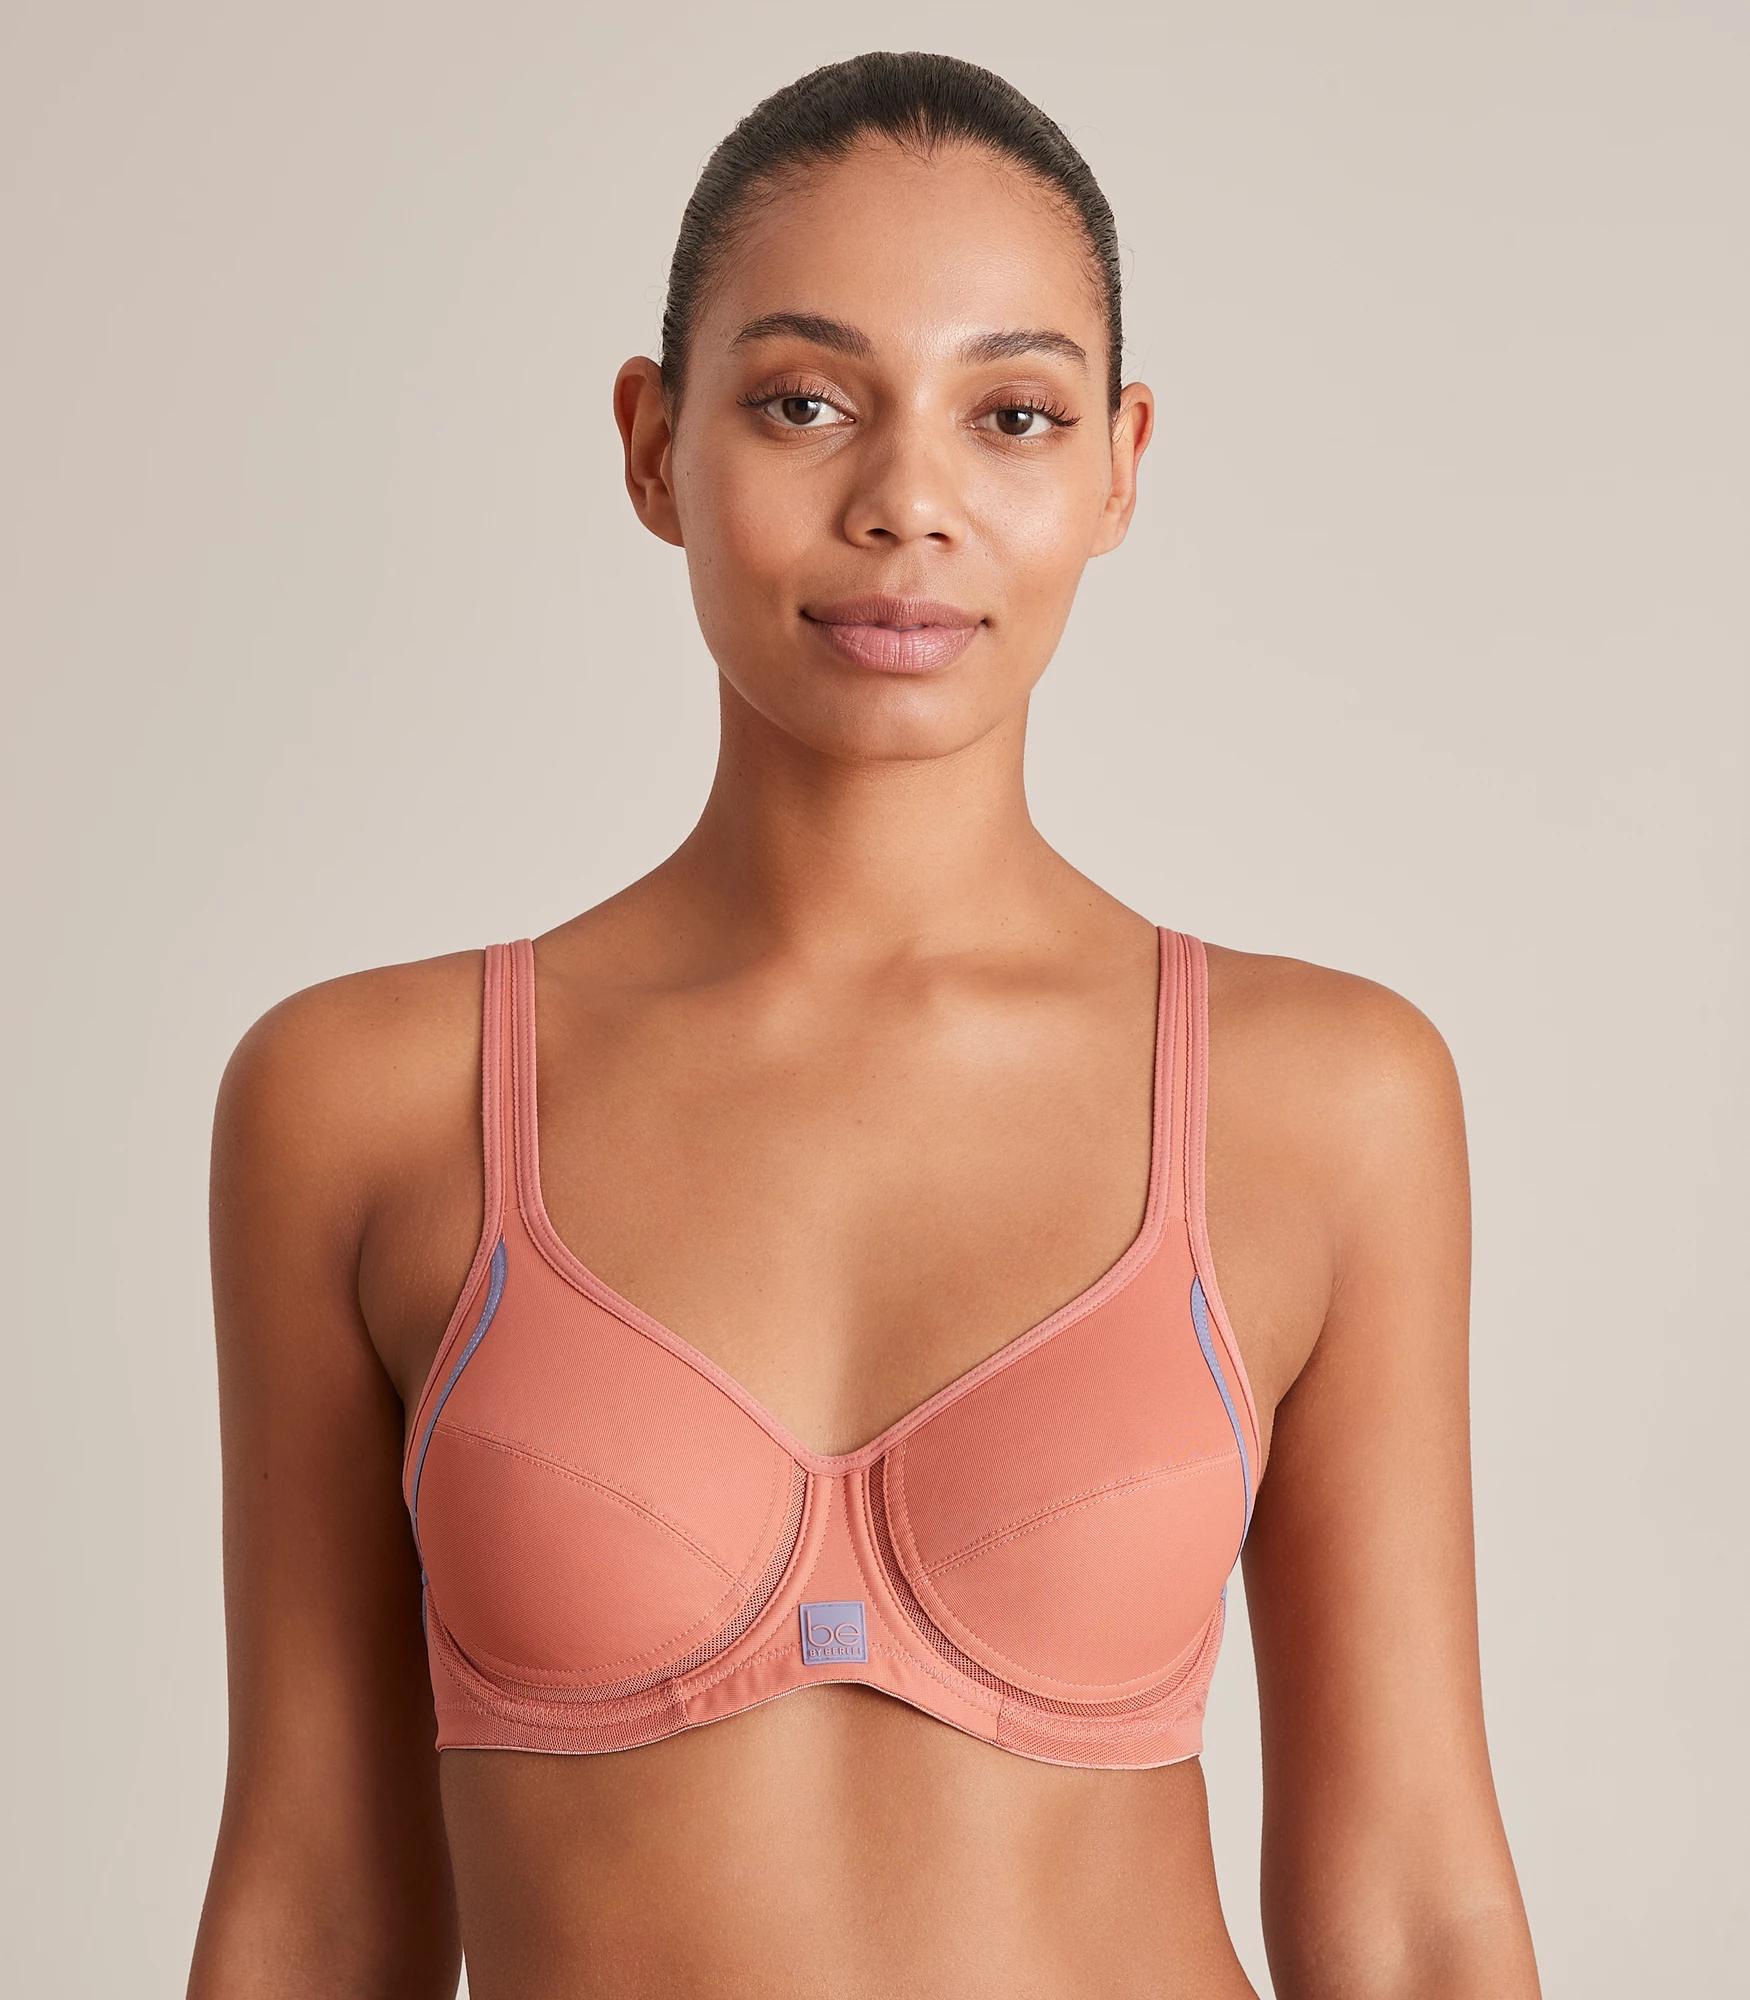 Be By Berlei High Impact Non-Contour Sports Bra - Tainted Love